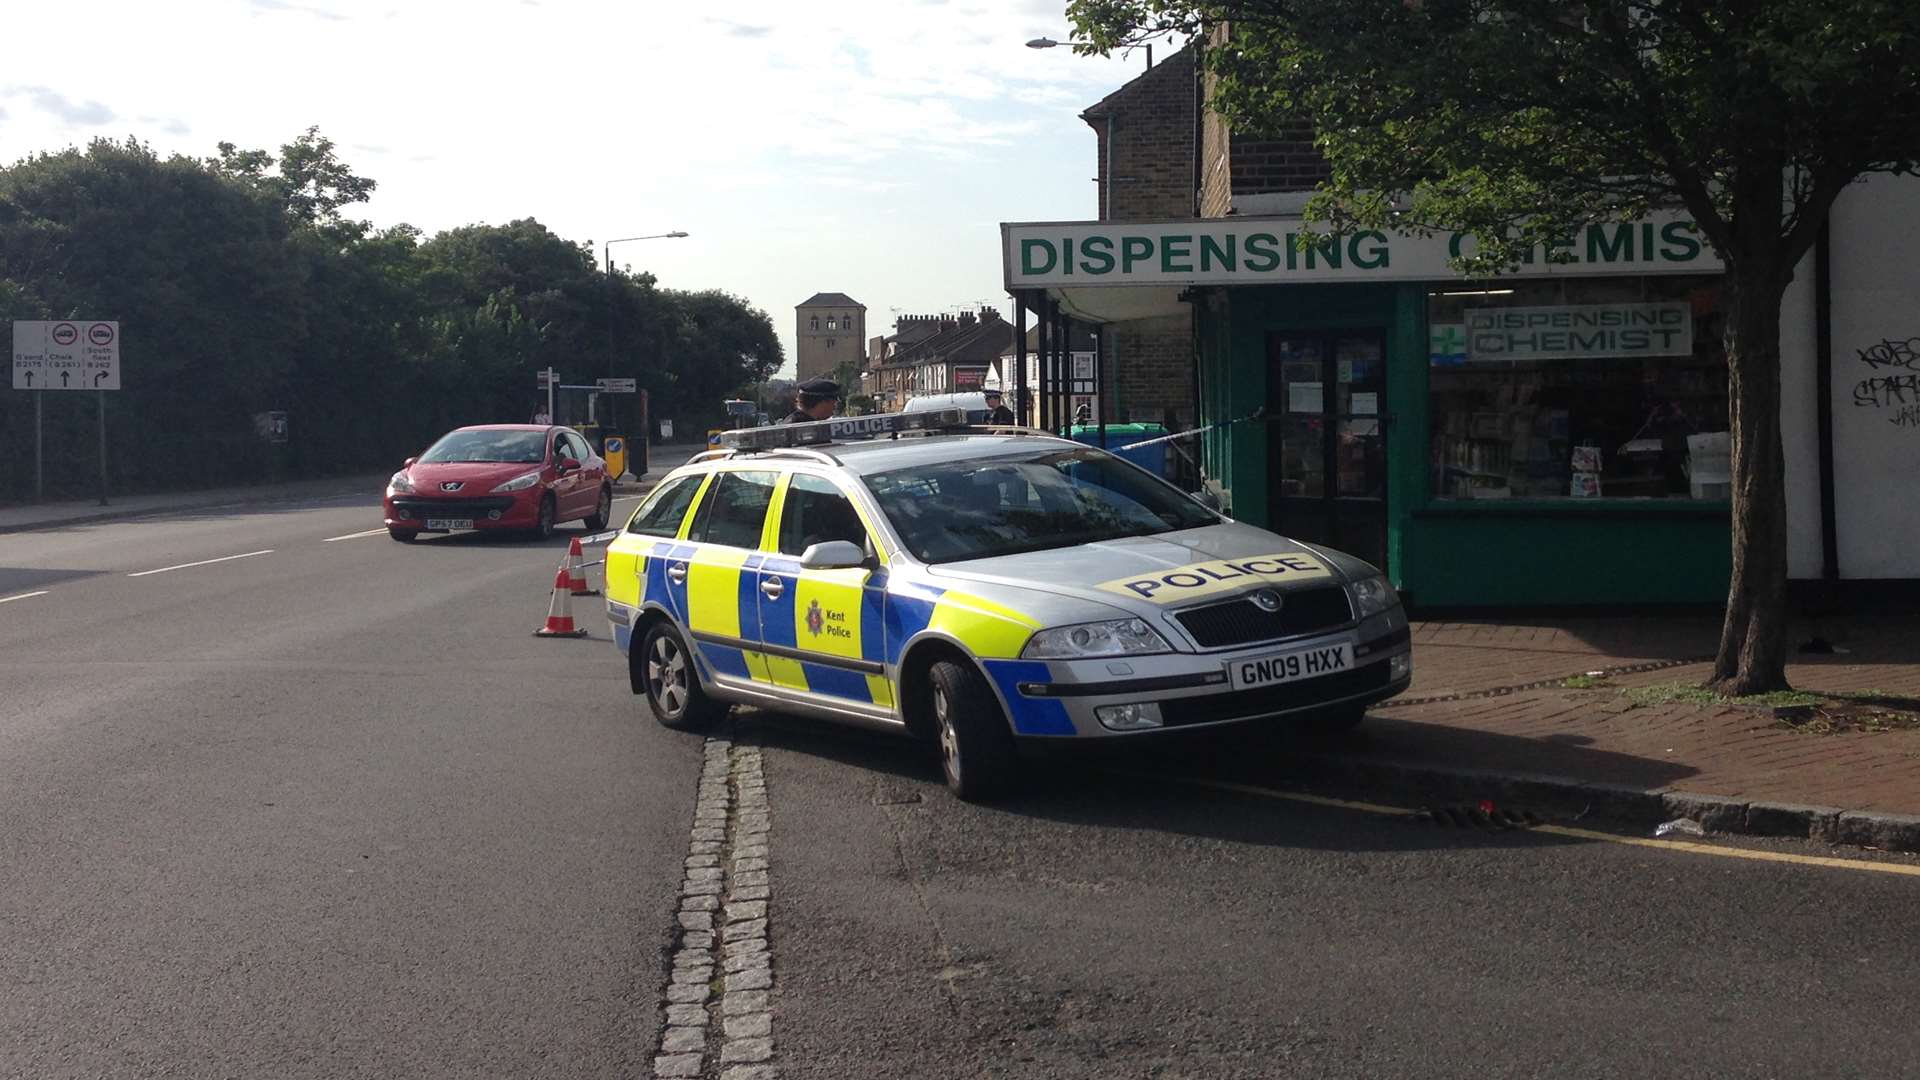 A police car is parked outside the chemist's following the attack